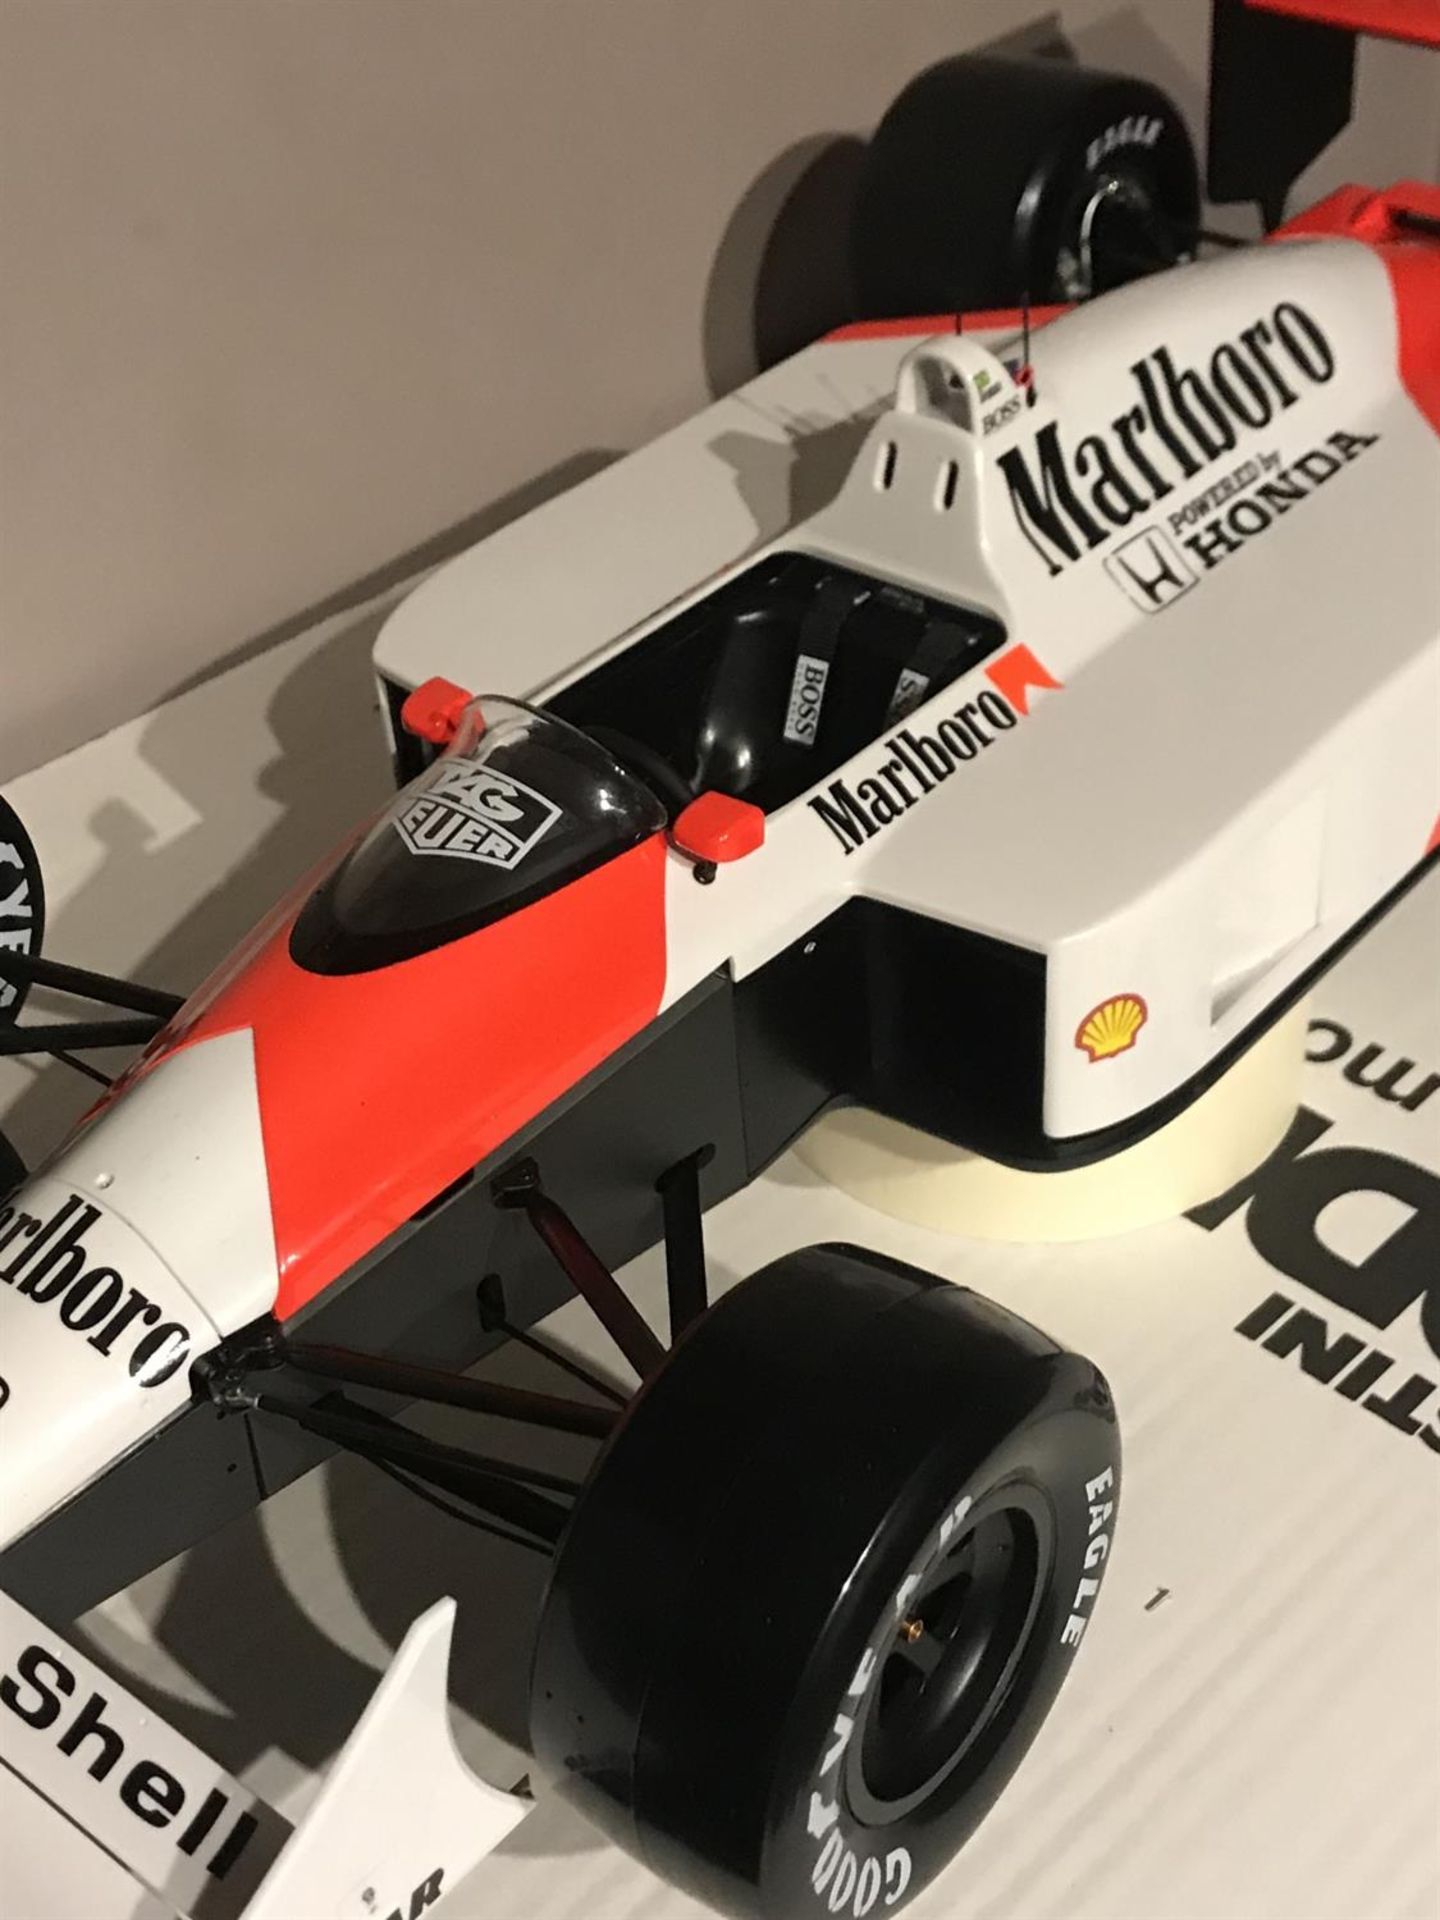 McLaren MP4/4 1:8th Scale Highly Detailed Kyosho DeAgostini Model with Display Case - Image 3 of 10